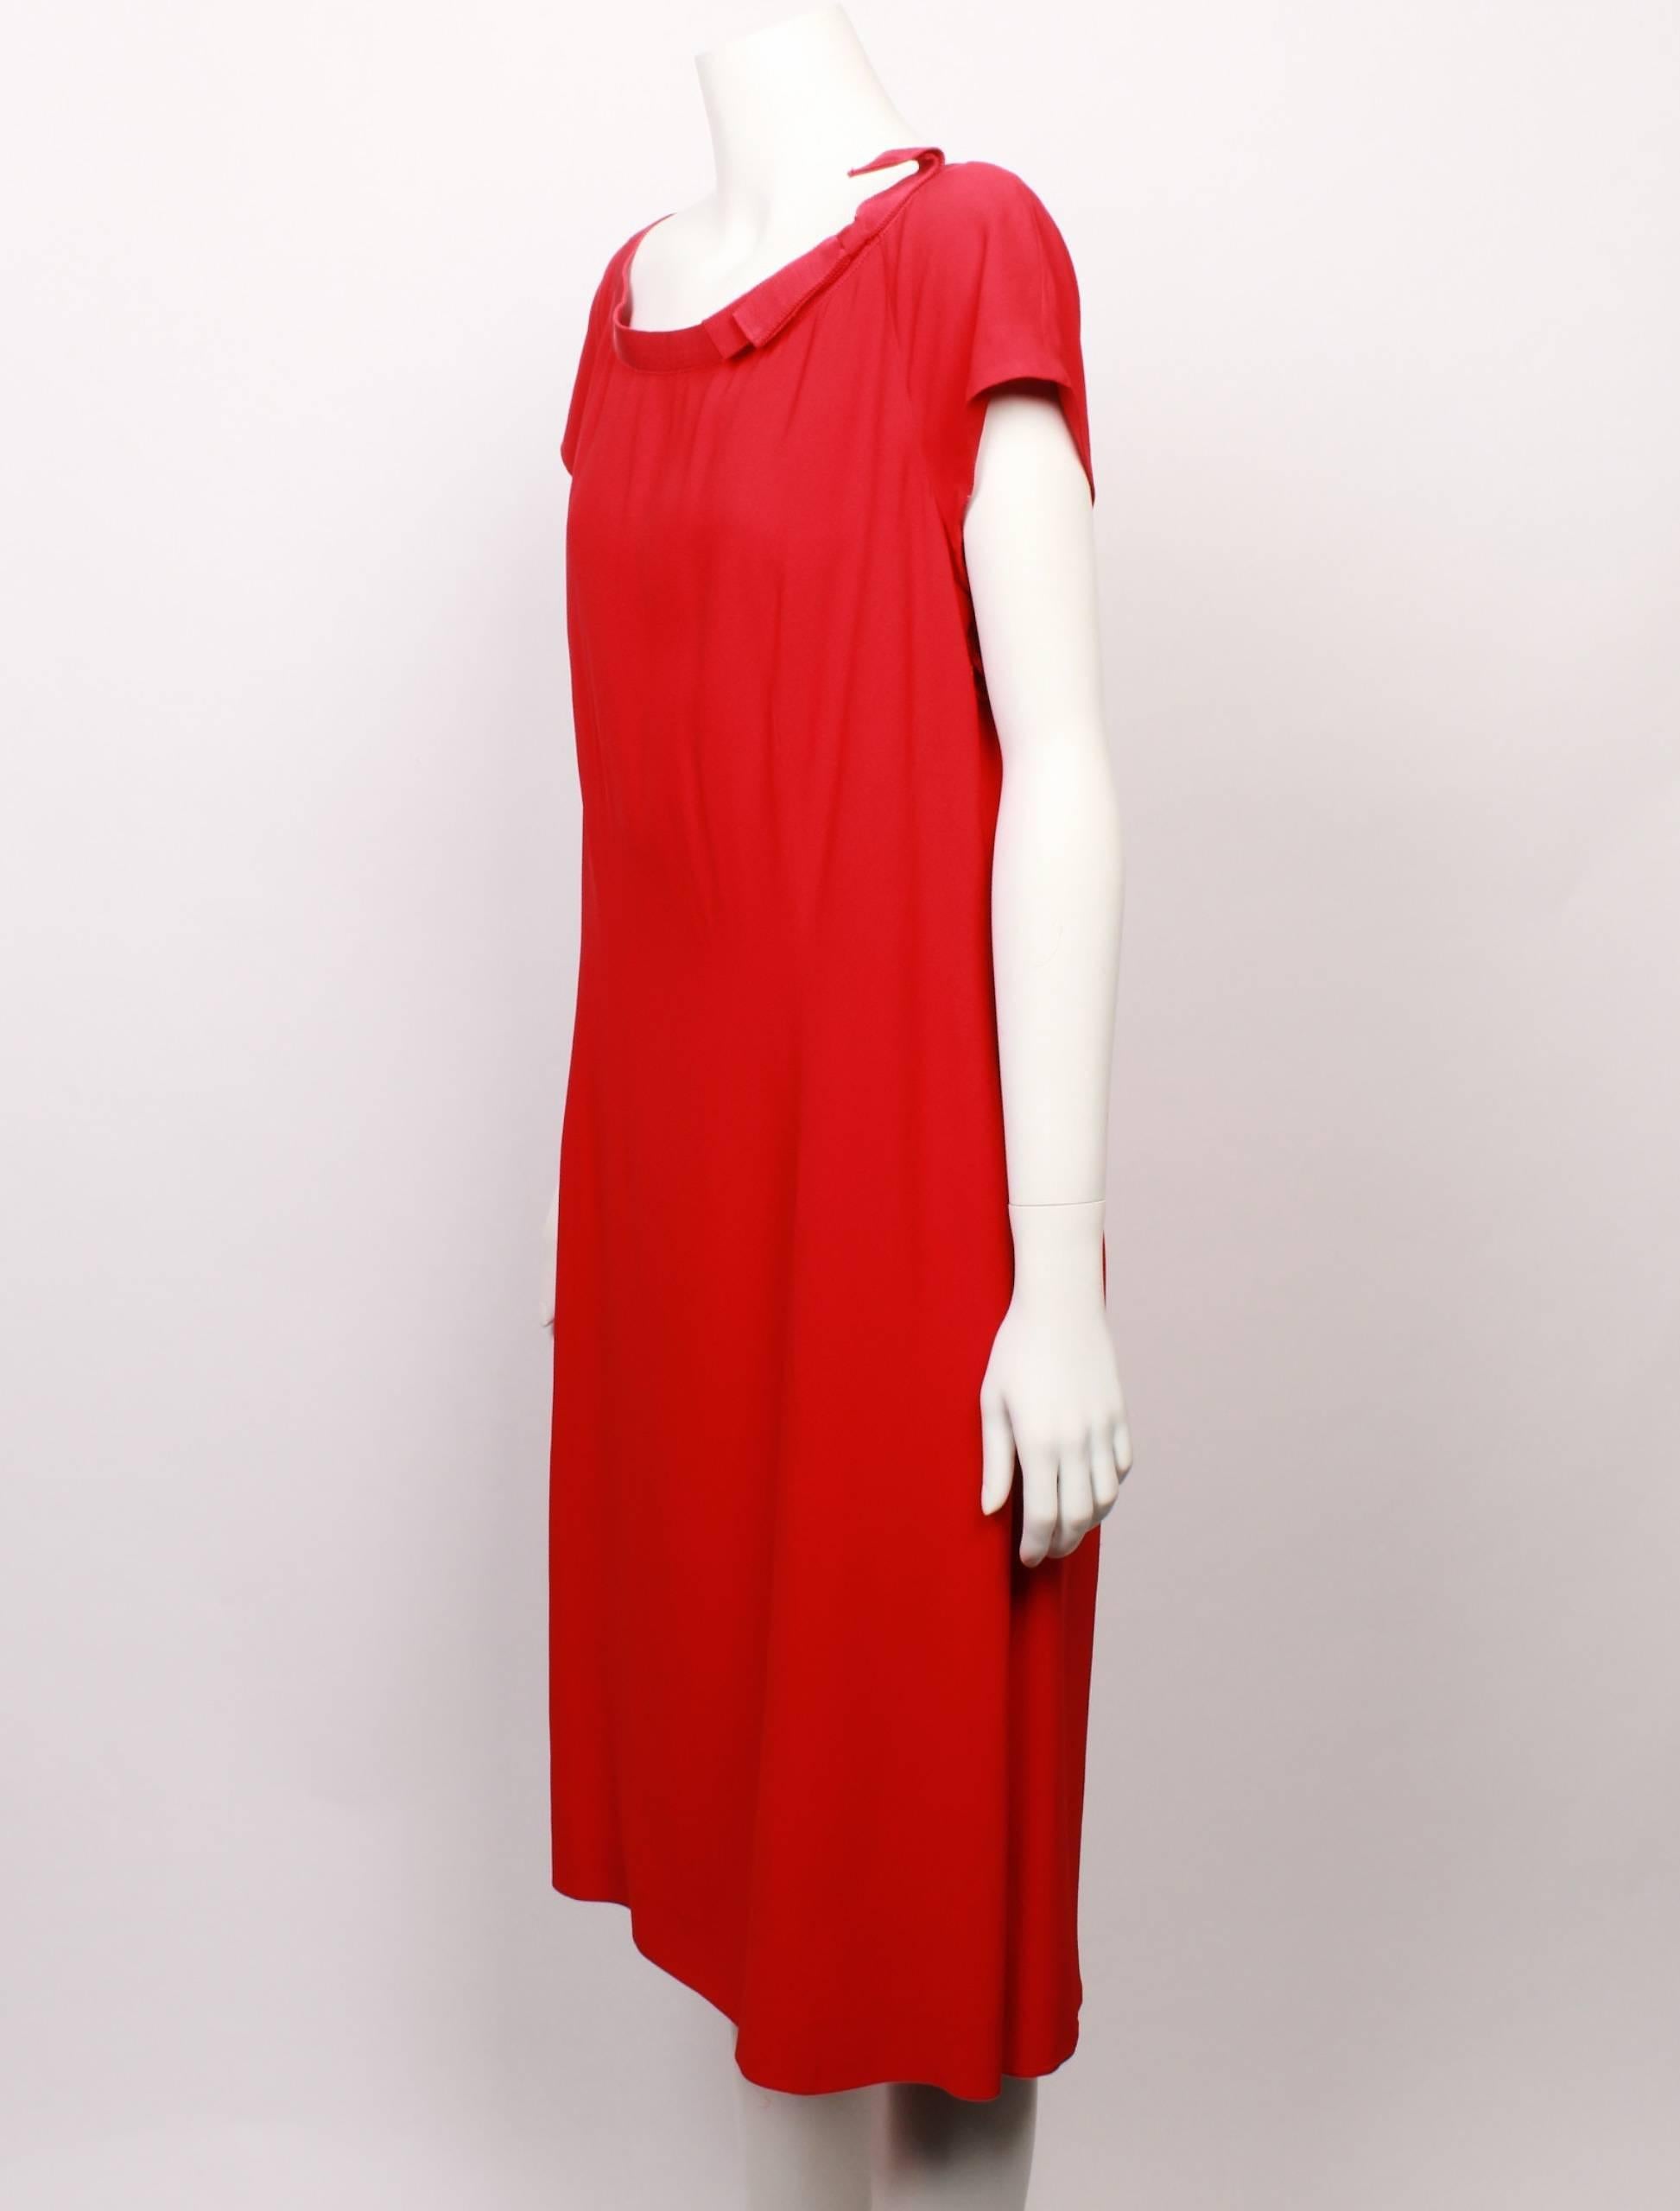 Moschino Red Shift Dress with Bow Detail In Good Condition In Melbourne, Victoria